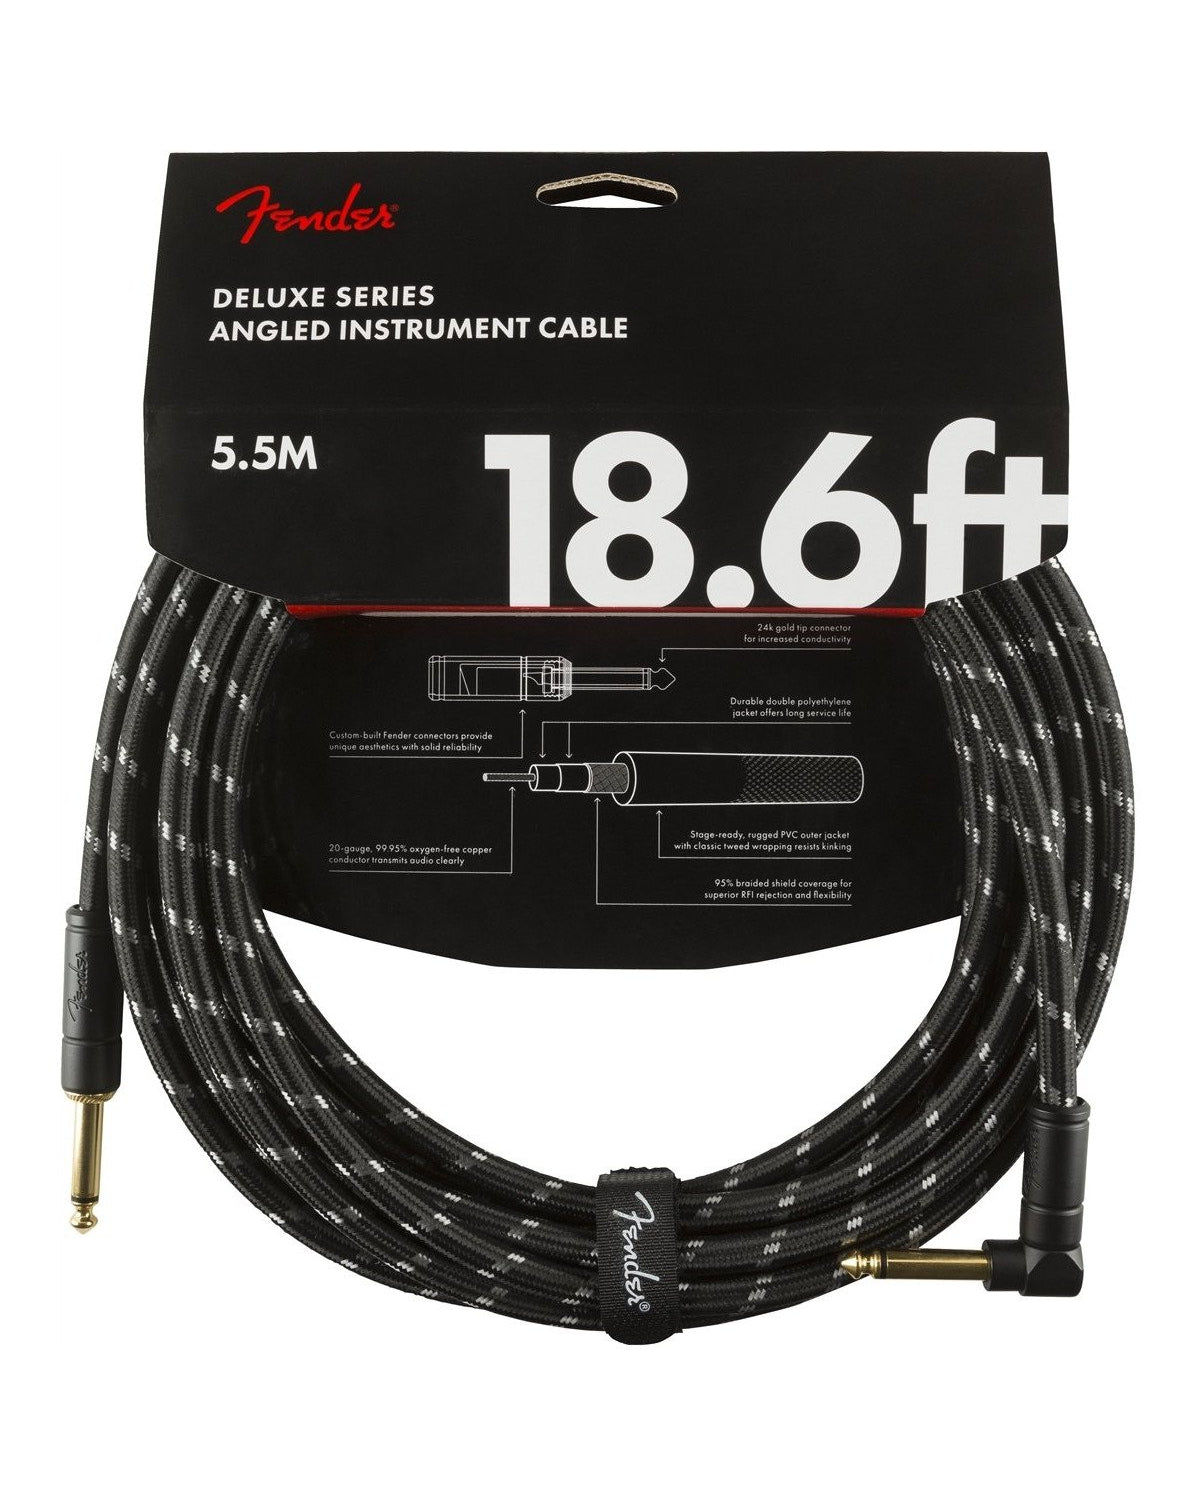 Front of Fender Deluxe Series Instrument Cable in packaging